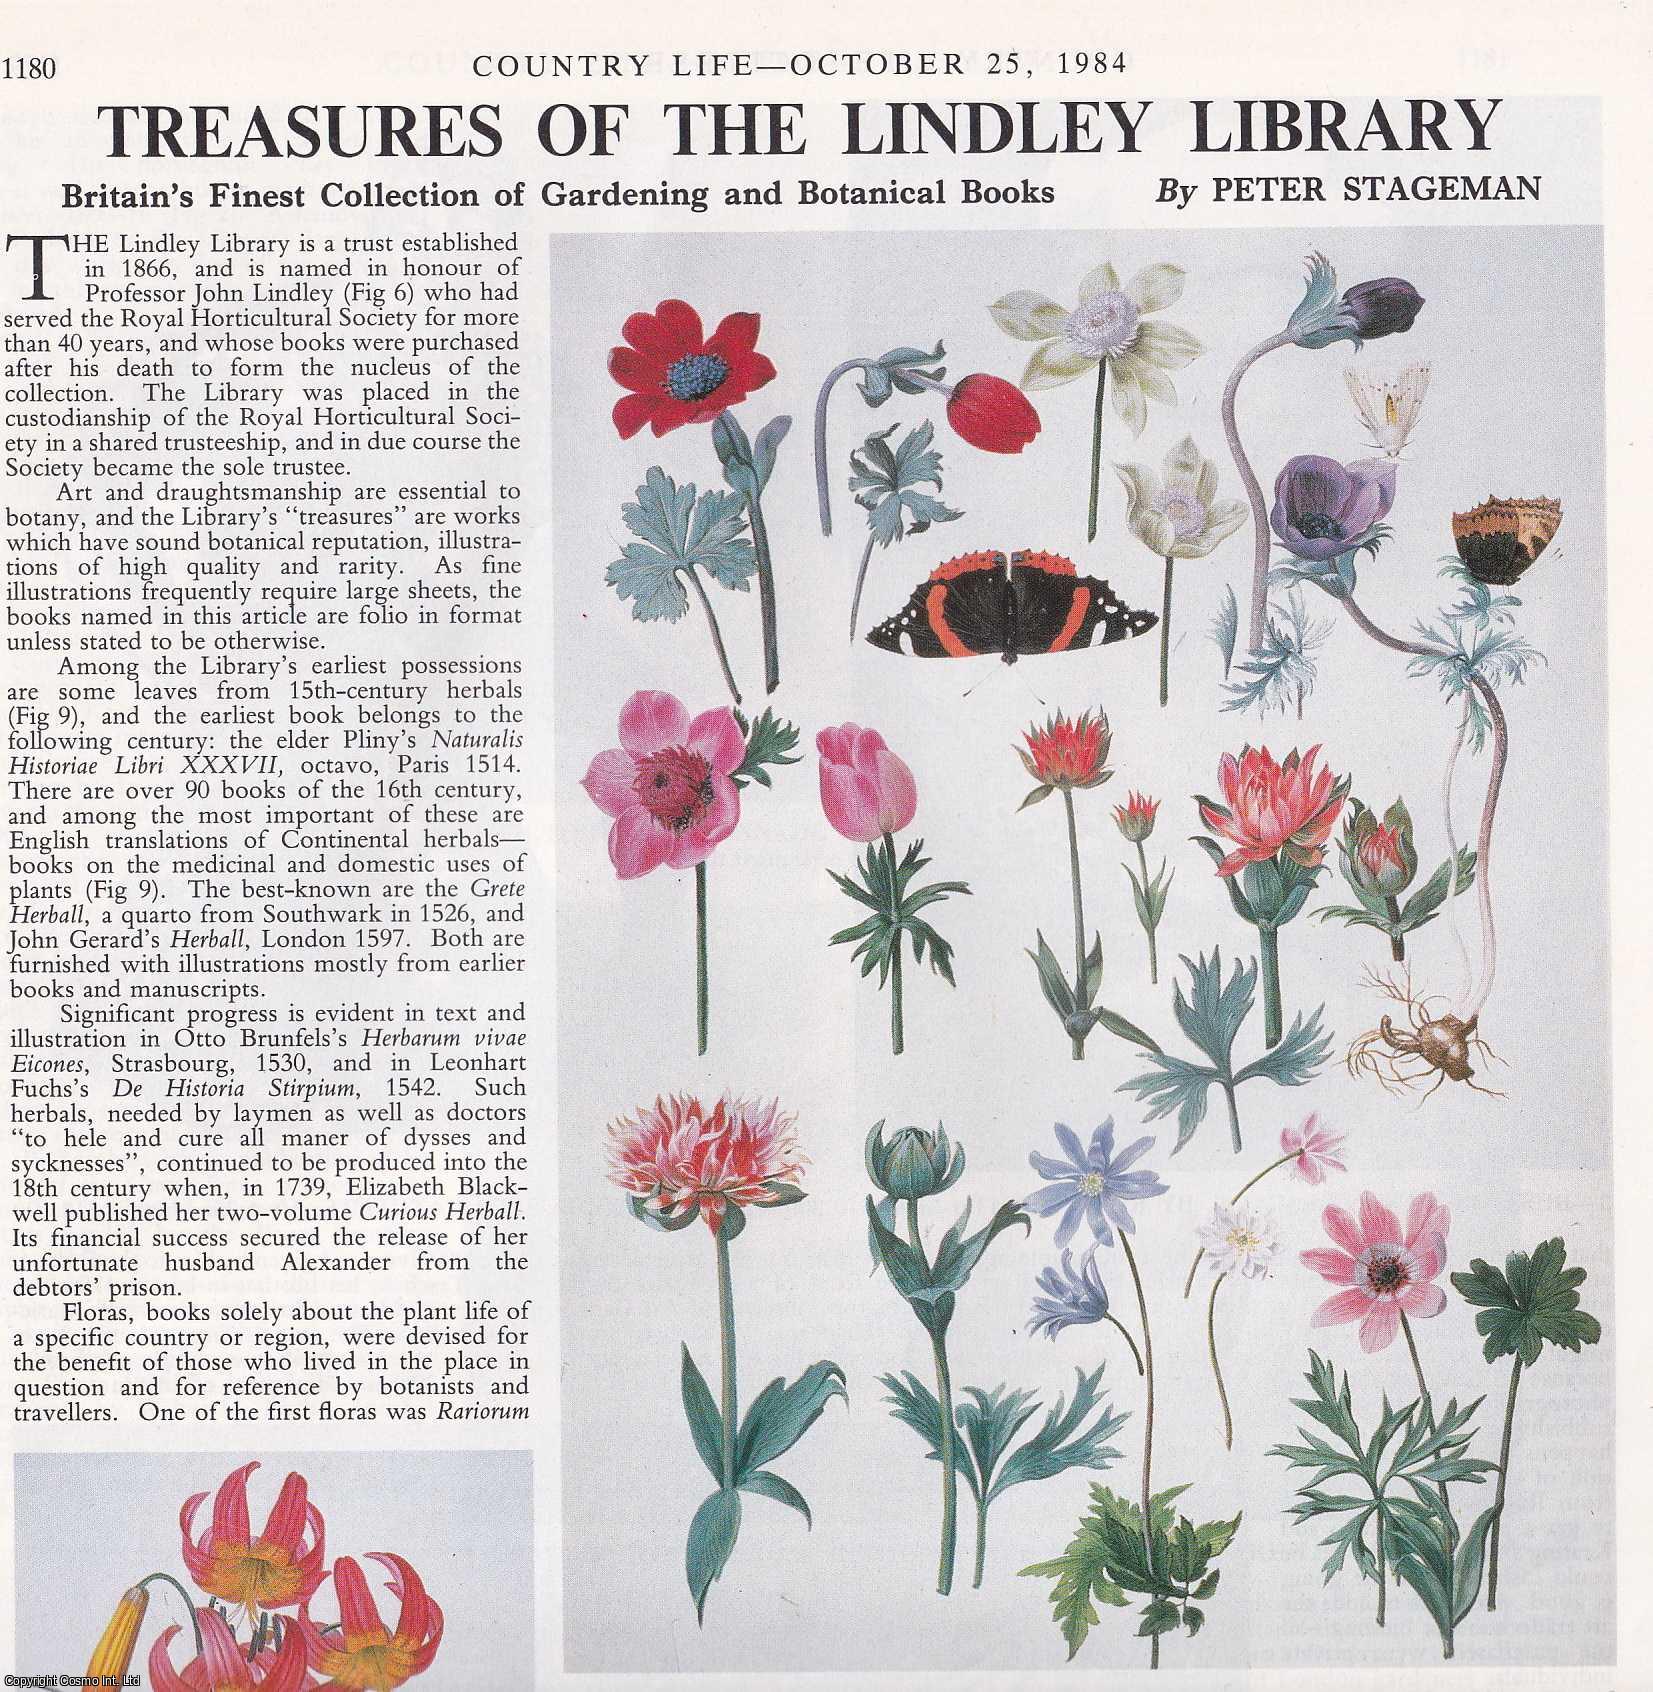 Peter Stageman - Britain's Finest Collection of Gardening and Botanical Books: The Lindley Library. Several pictures and accompanying text, removed from an original issue of Country Life Magazine, 1984.